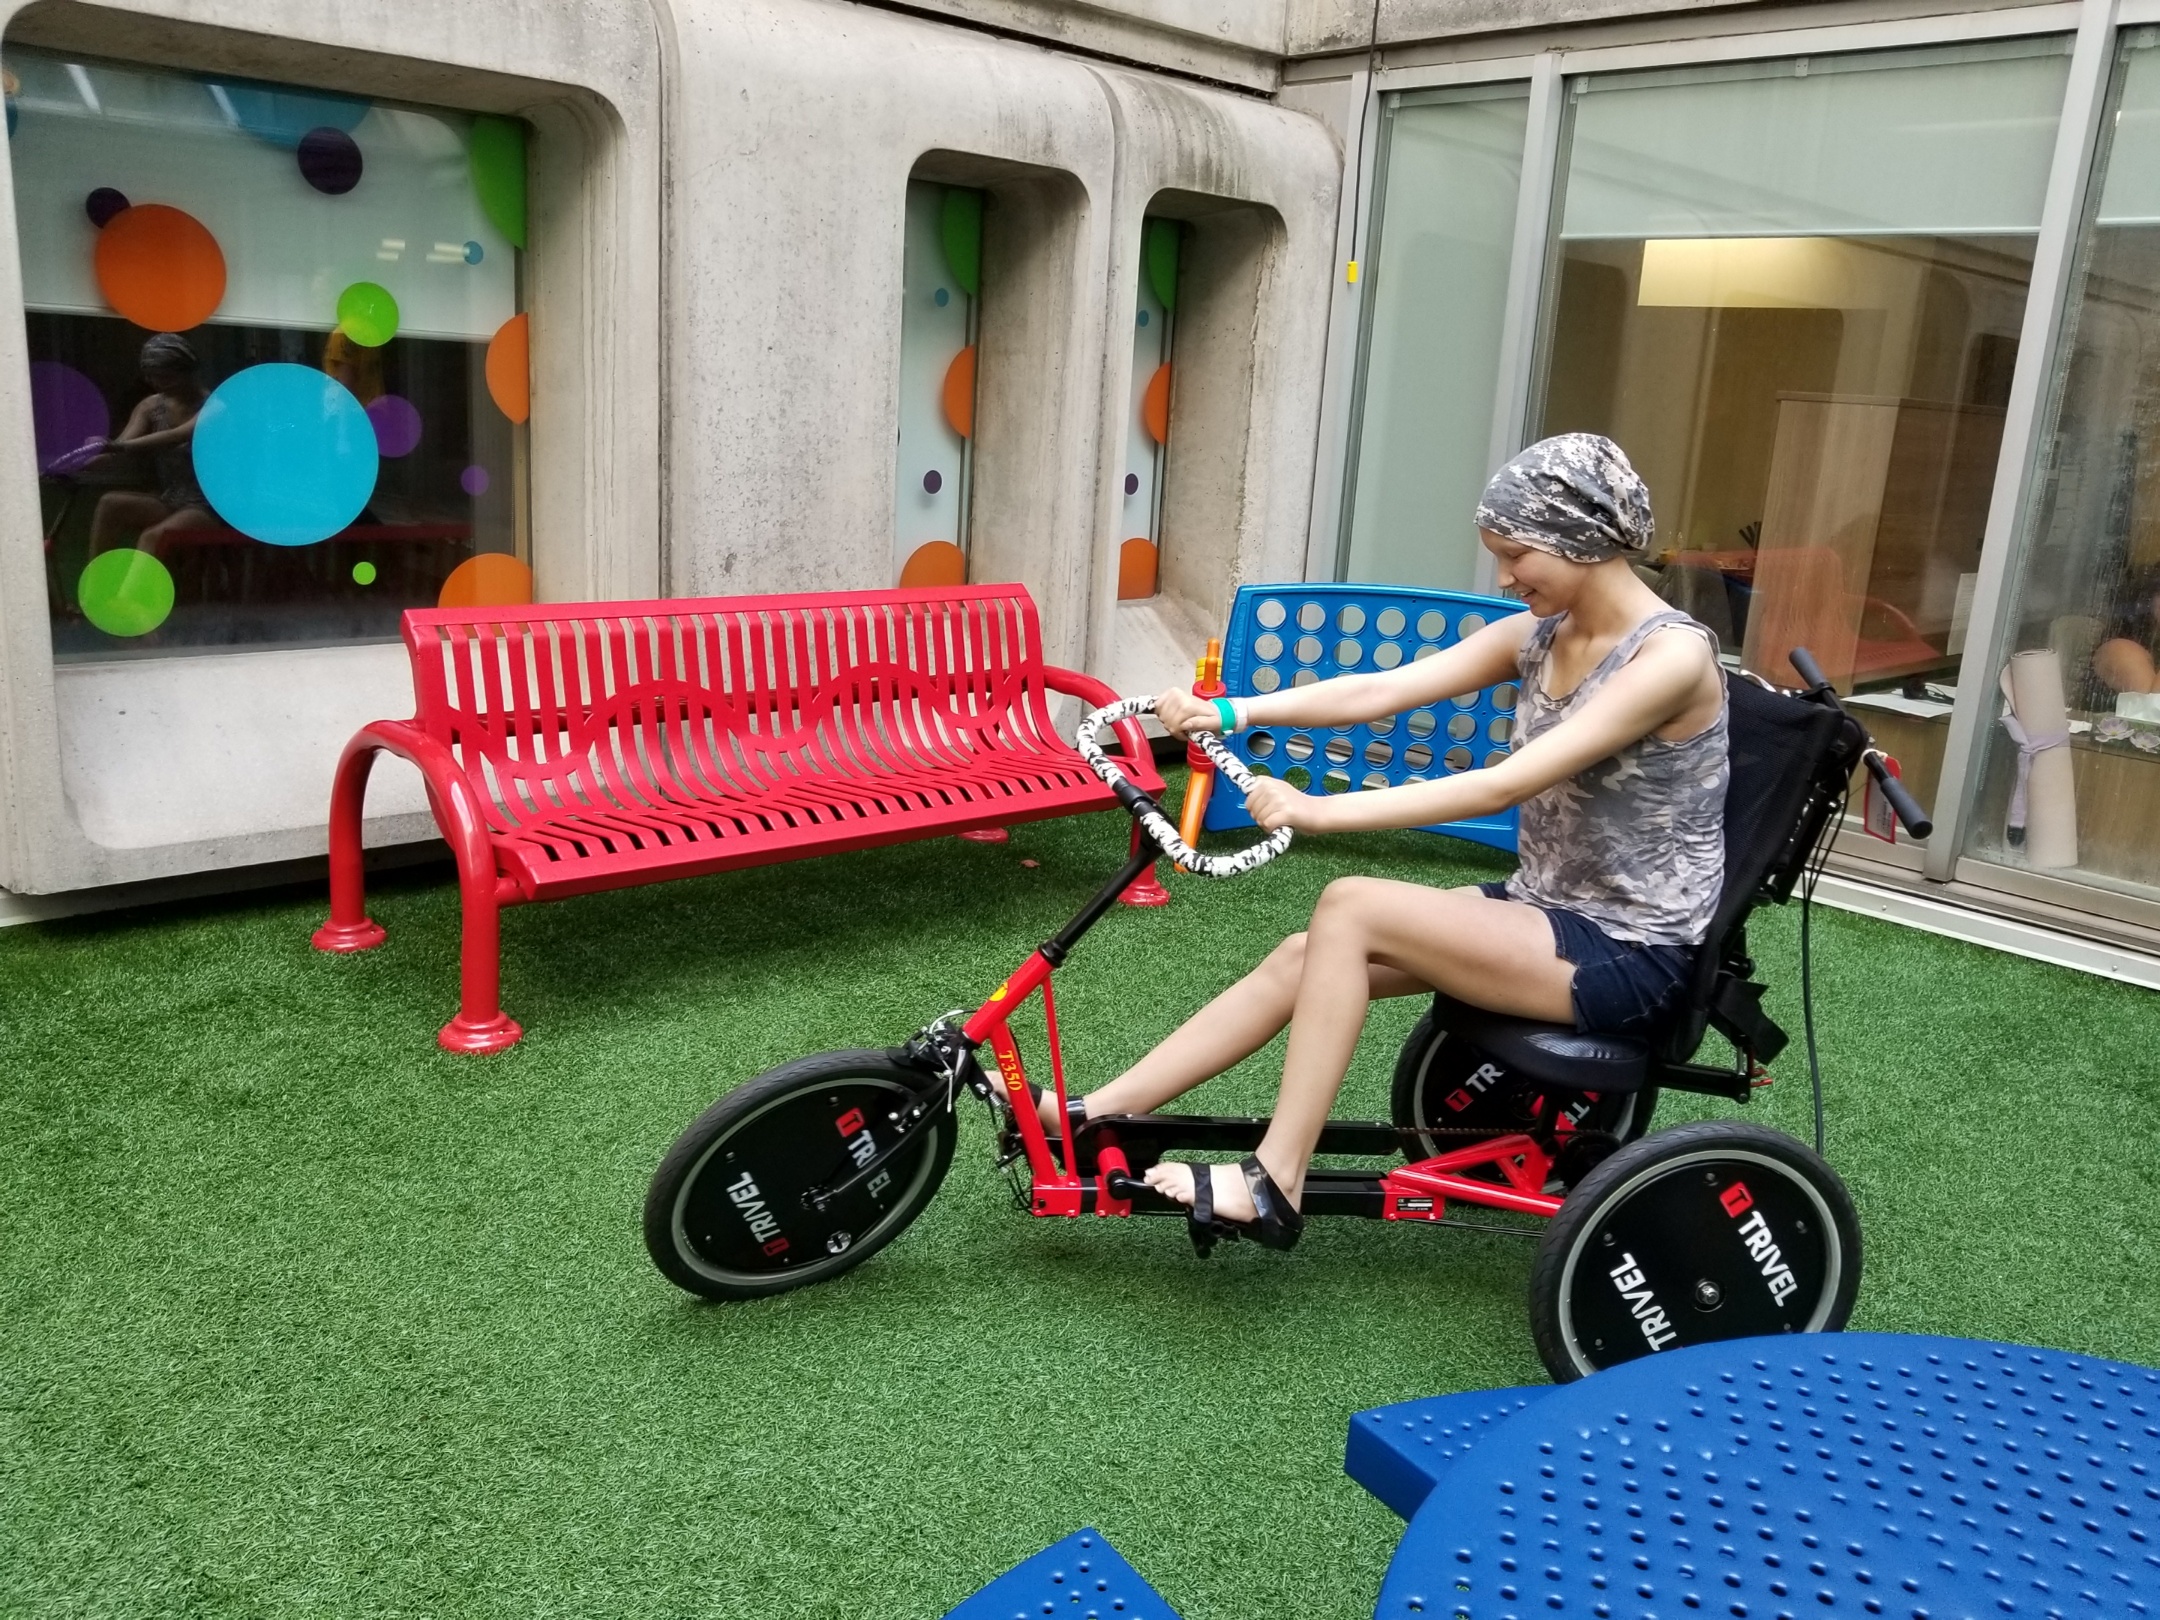 Sky rides an adaptive tricycle in a courtyard at McMaster Children's Hospital